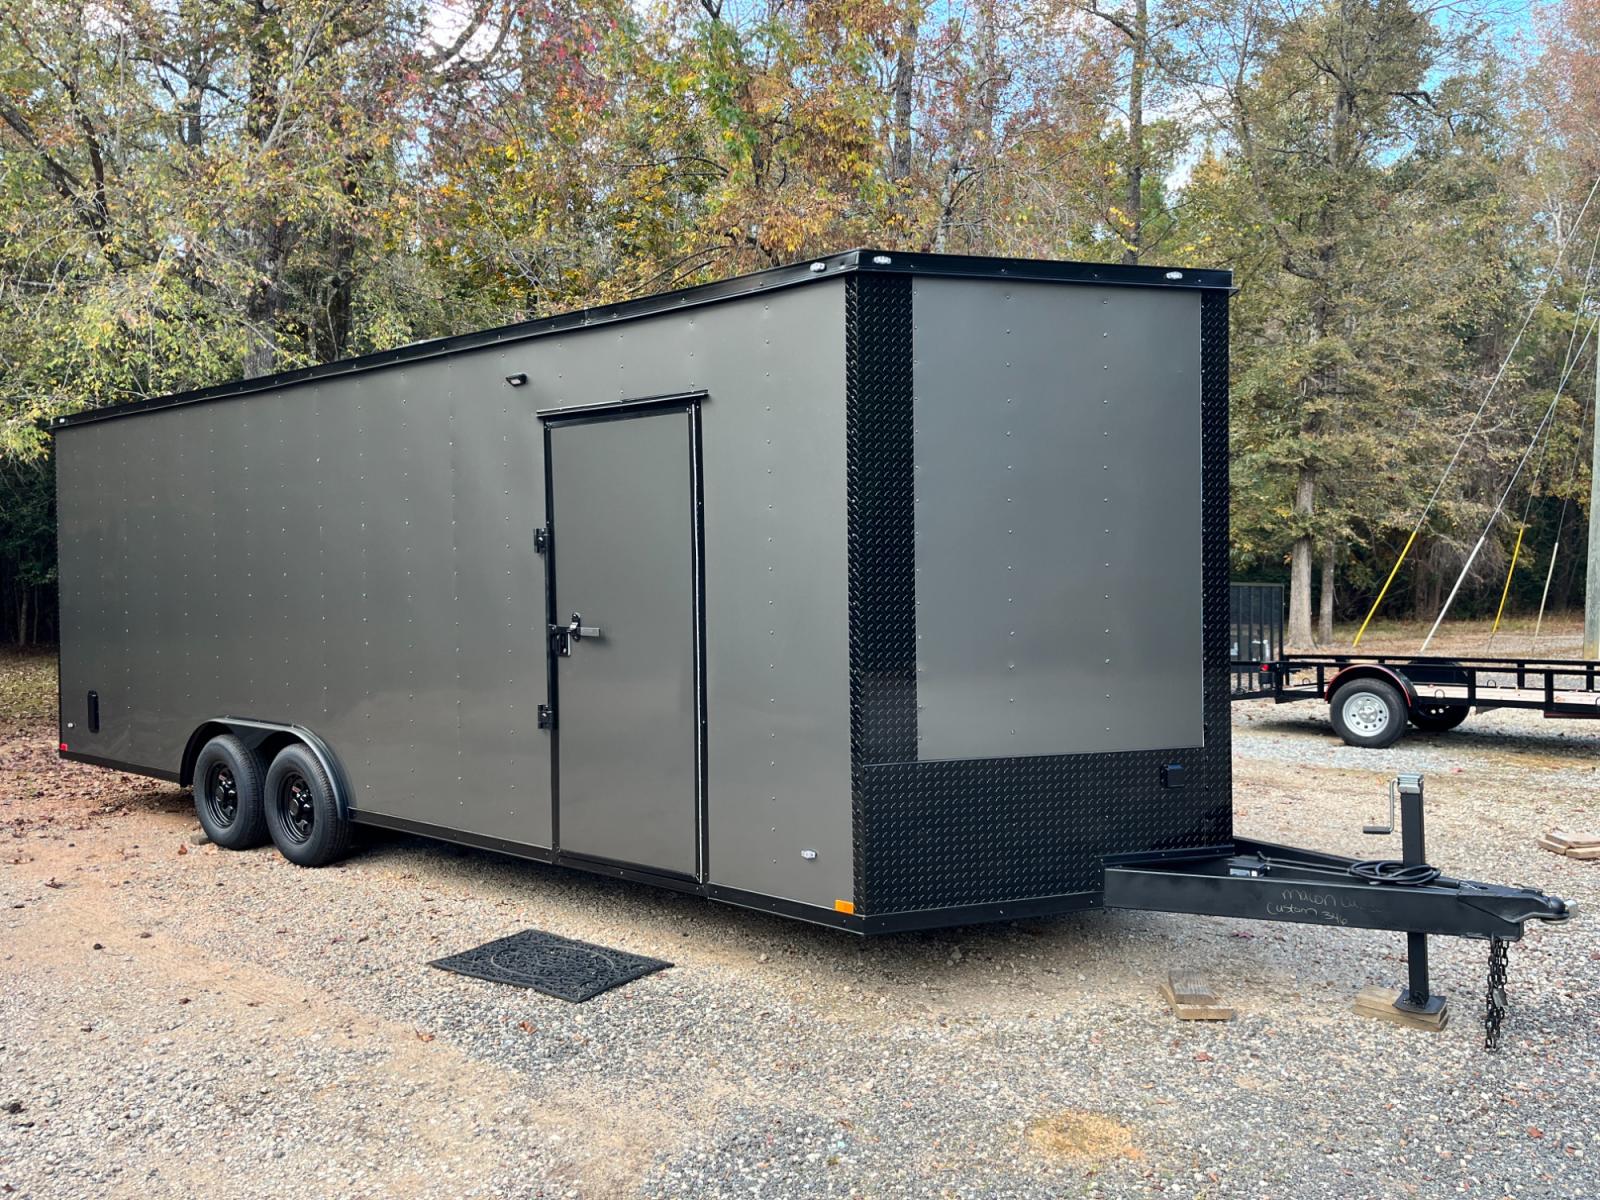 2023 .080 Charcoal Metallic w/Black Out Pkg. Elite Cargo 8.5ft X 24ft Tandem , located at 1330 Rainey Rd., Macon, 31220, (478) 960-1044, 32.845638, -83.778687 - Brand New 2023 Model Elite Cargo Trailer, Made Tifton, GA 7ft 4" Tall Inside Height, Air Conditioner, Insulated too! 15,500 BTU A/C Unit, 5 Inside LED Light Strips! Lights Up Really Bright Inside! This Deluxe Enclosed Car Hauler has Awesome Features! .080 Thick Charcoal Metallic Skin! Stunning - Photo #20